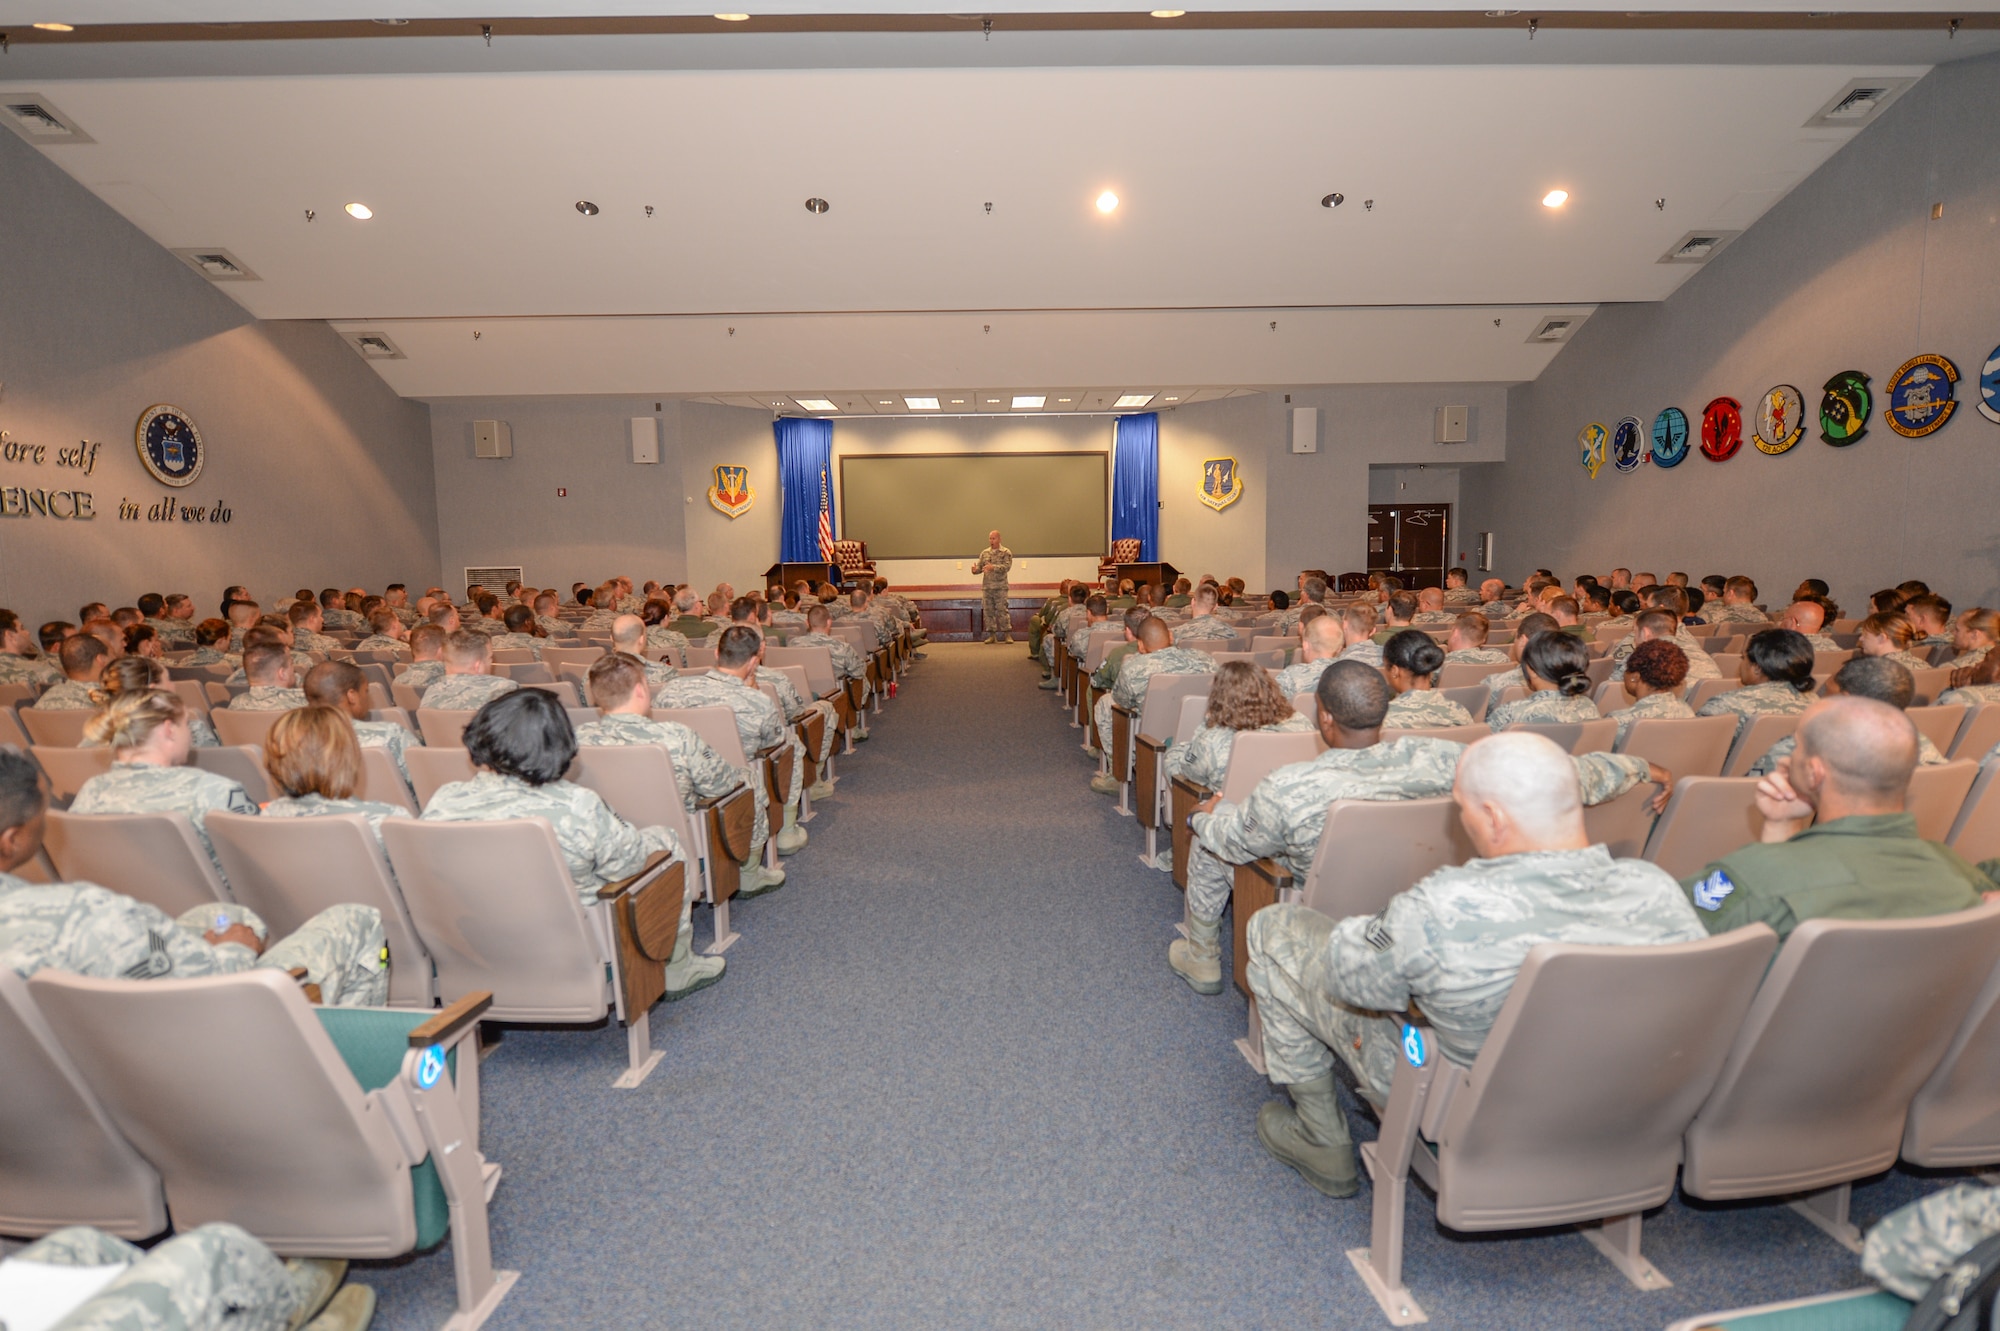 U.S. Air Force Chief Master Sgt. James W. Hotaling, Air National Guard command chief, speaks to Airmen from the 116th Air Control Wing and 202nd Engineering Installation Squadron, Georgia Air National Guard, during an enlisted all call at Robins Air Force Base, Ga., July 16, 2015. During his visit, Hotaling conducted two town hall style meetings and met with key enlisted leadership councils and Airmen resiliency representatives. His time with the Airmen focused on sharing his message of a renewed commitment to the profession of arms, health of the force, and recognition of our Airmen and accomplishments. The visit offered the opportunity for Airmen in the wing to meet their top leader, share their concerns and gain perspective from the national level. (U.S. Air National Guard photo by Tech. Sgt. Regina Young/Released)